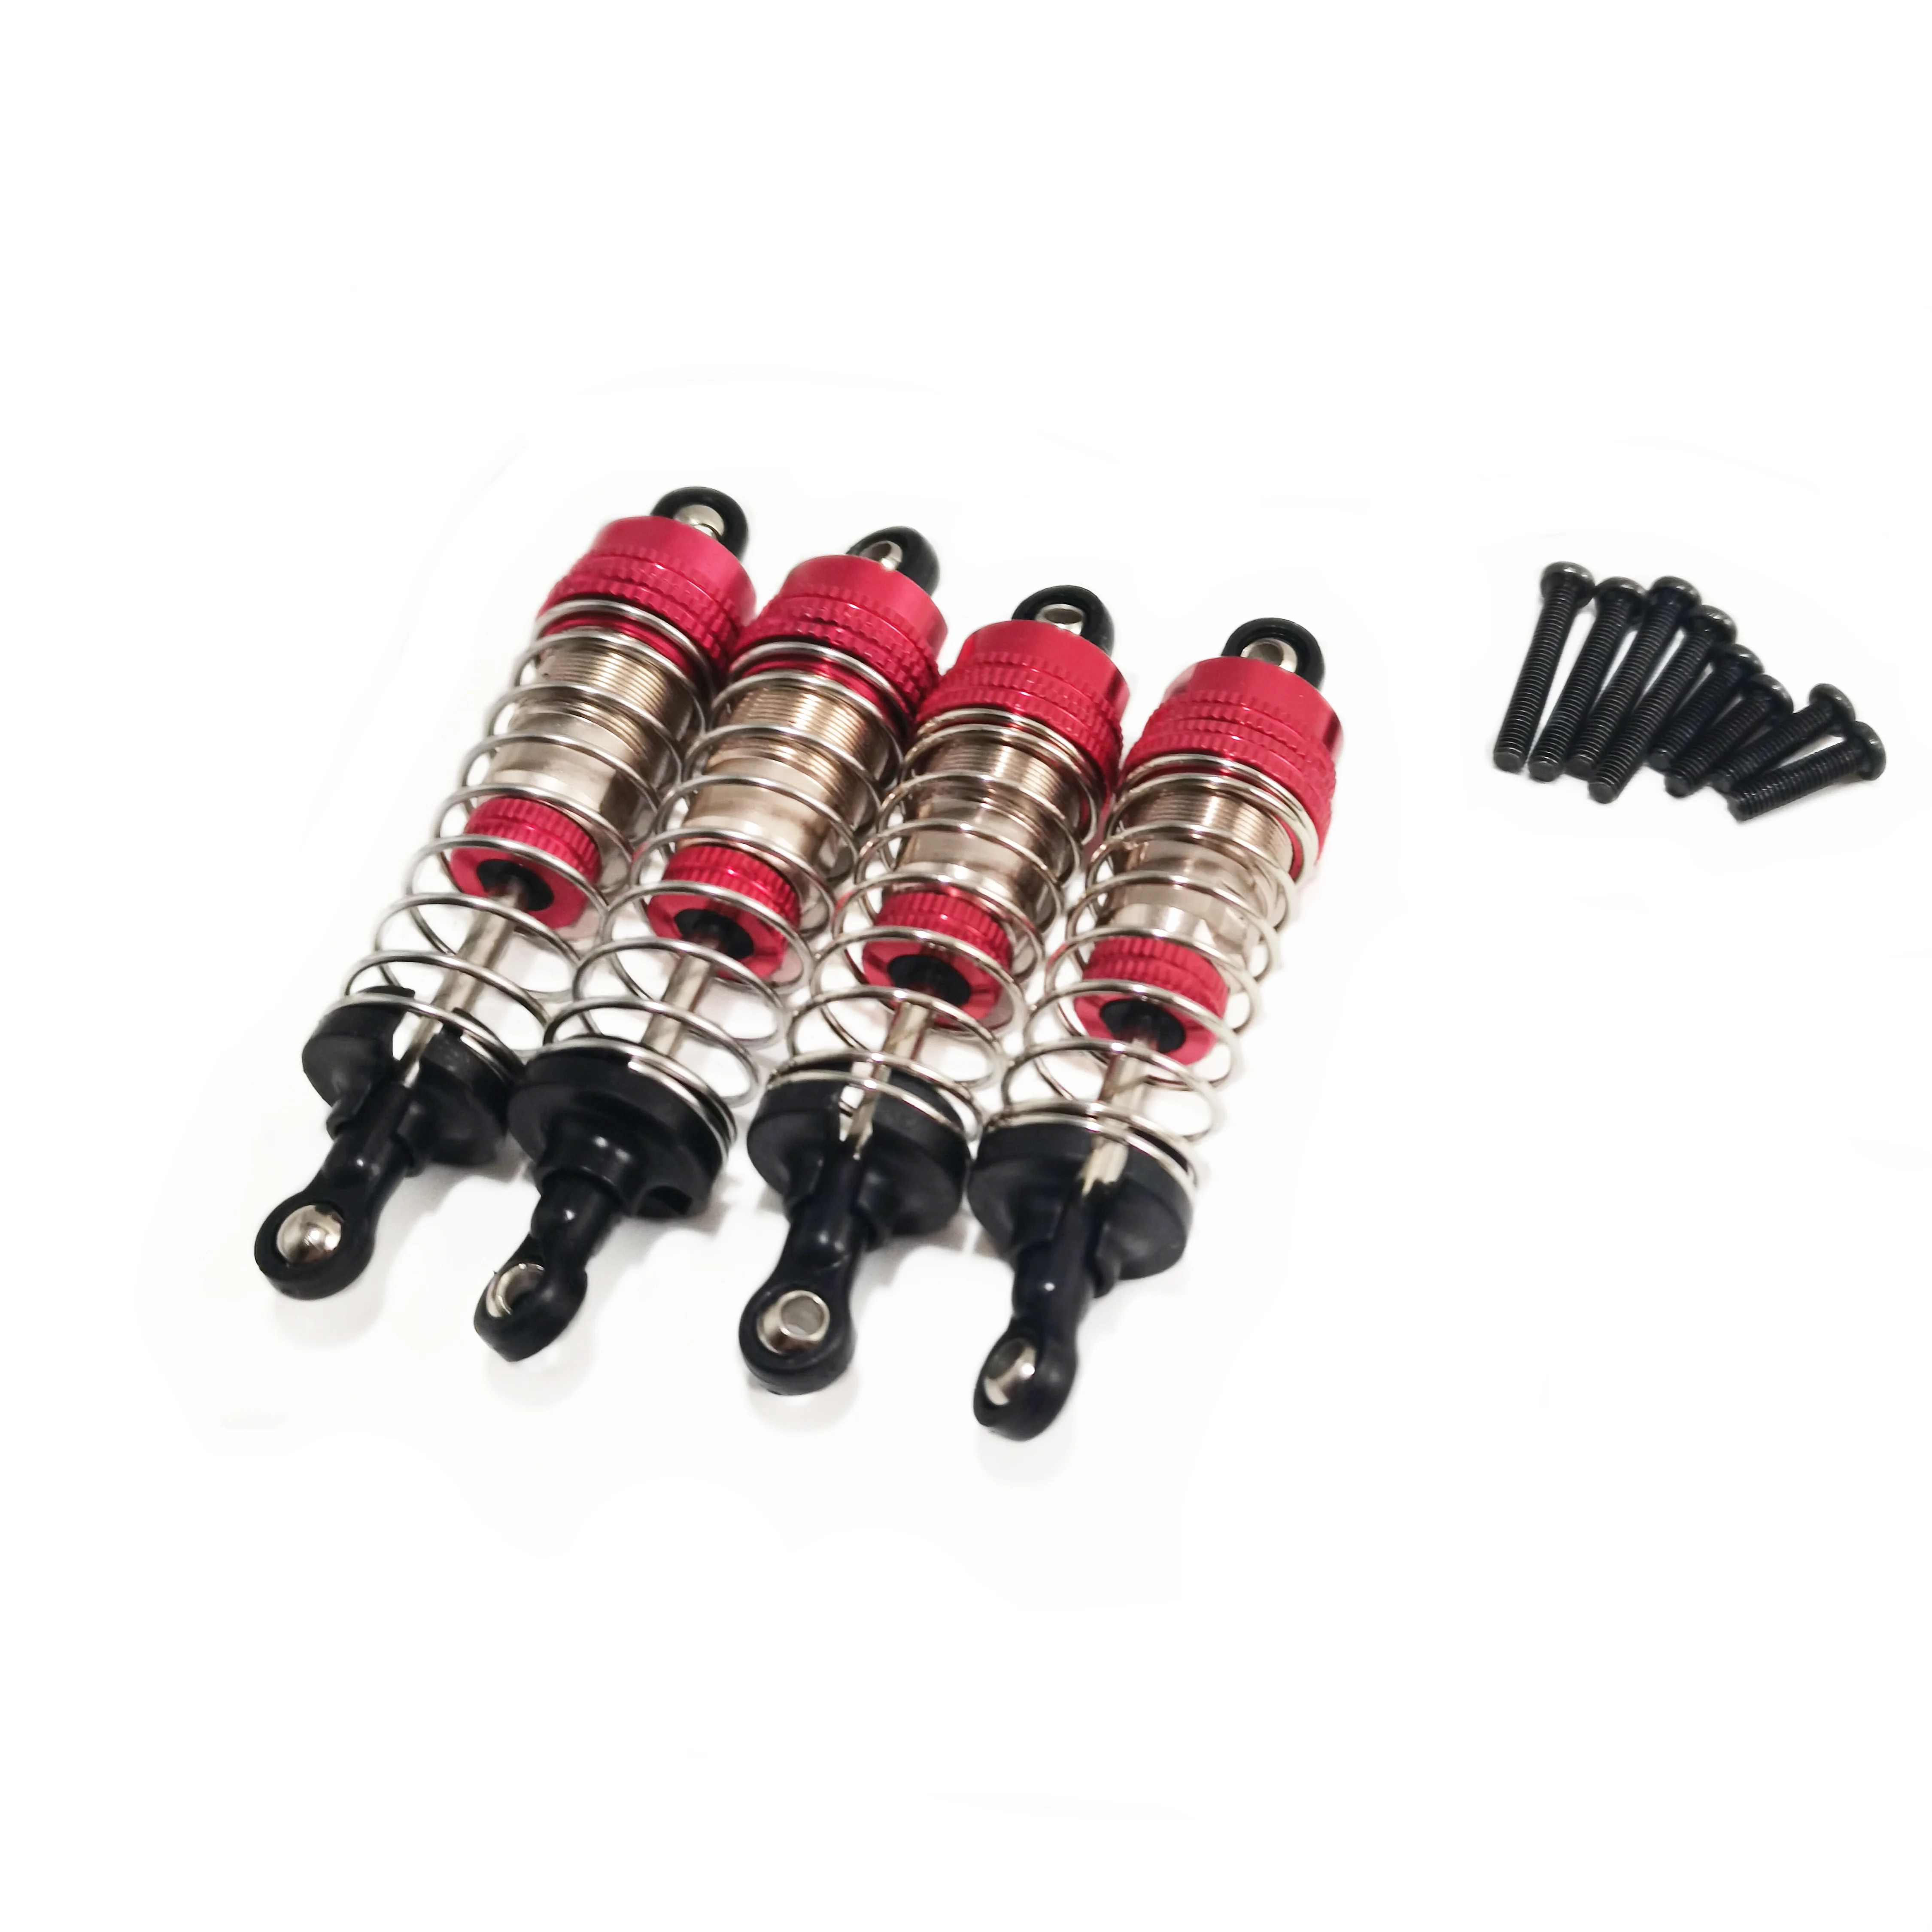 wltoys 144001 124017 124019 oil type Shock absorber front and rear 4pcs shocks - £12.58 GBP